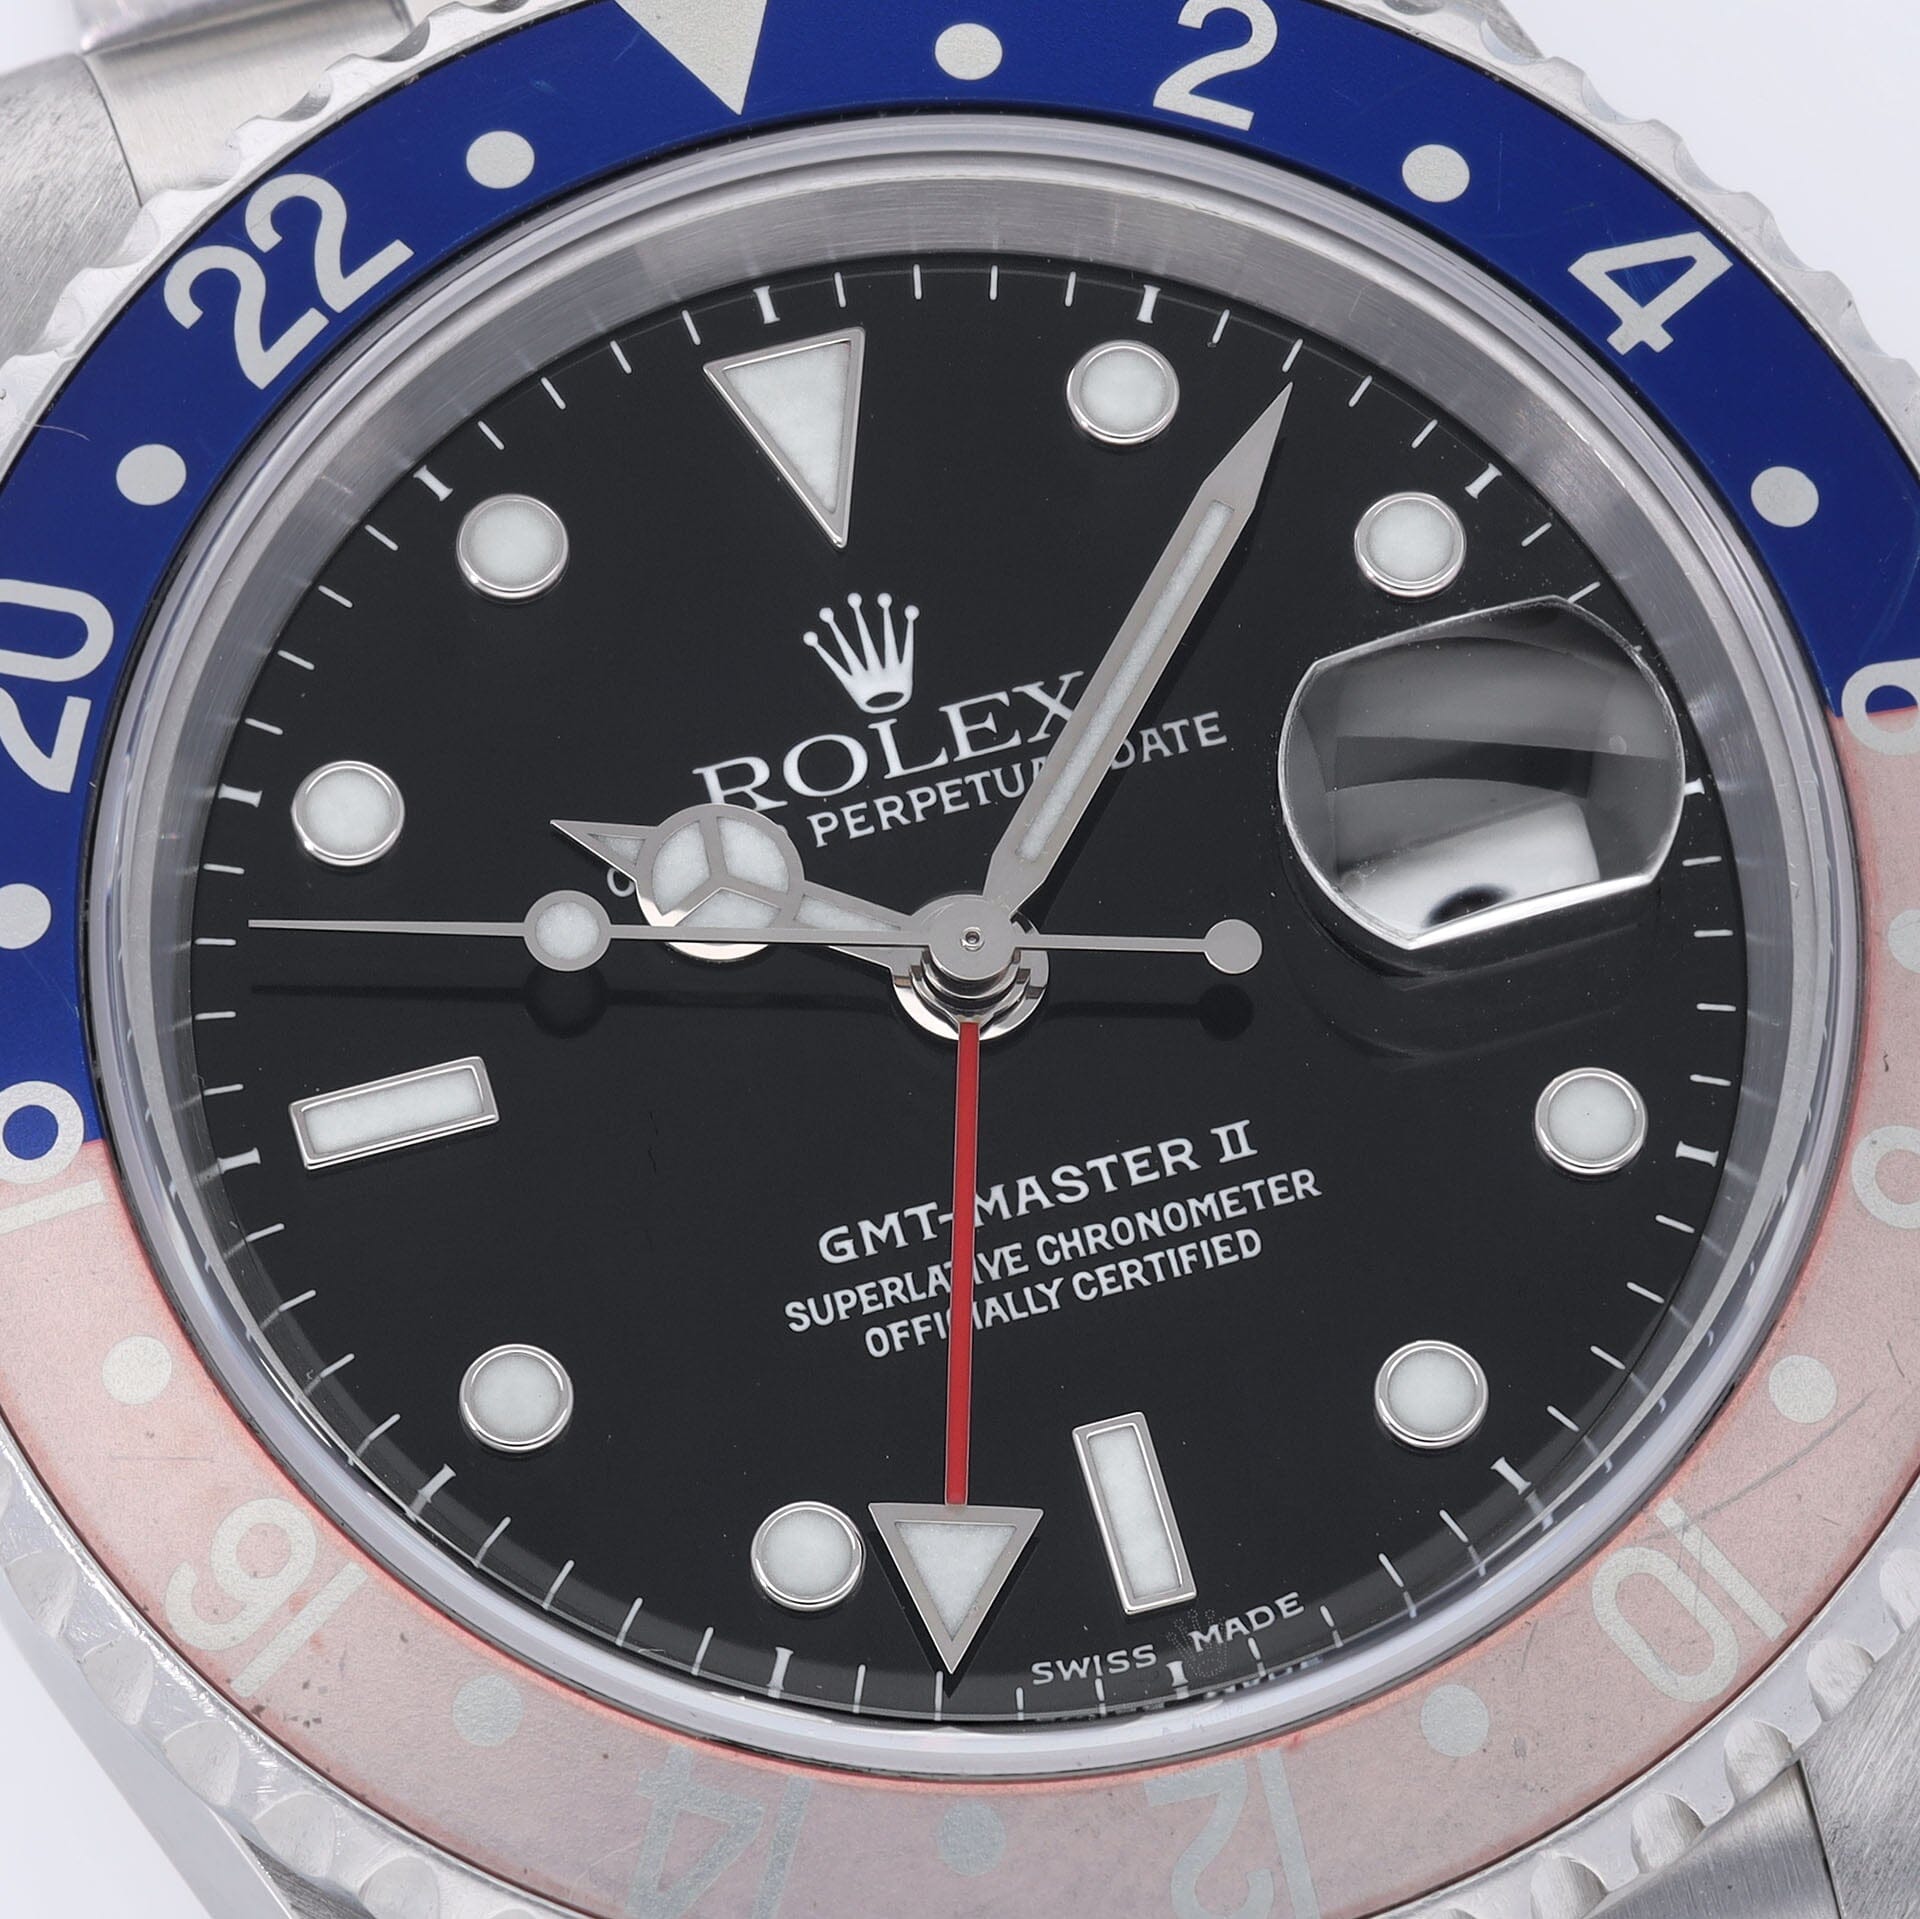 Rolex GMT-Master 2 16710 Faded Pepsi Bezel ‘Swiss Made’ Dial